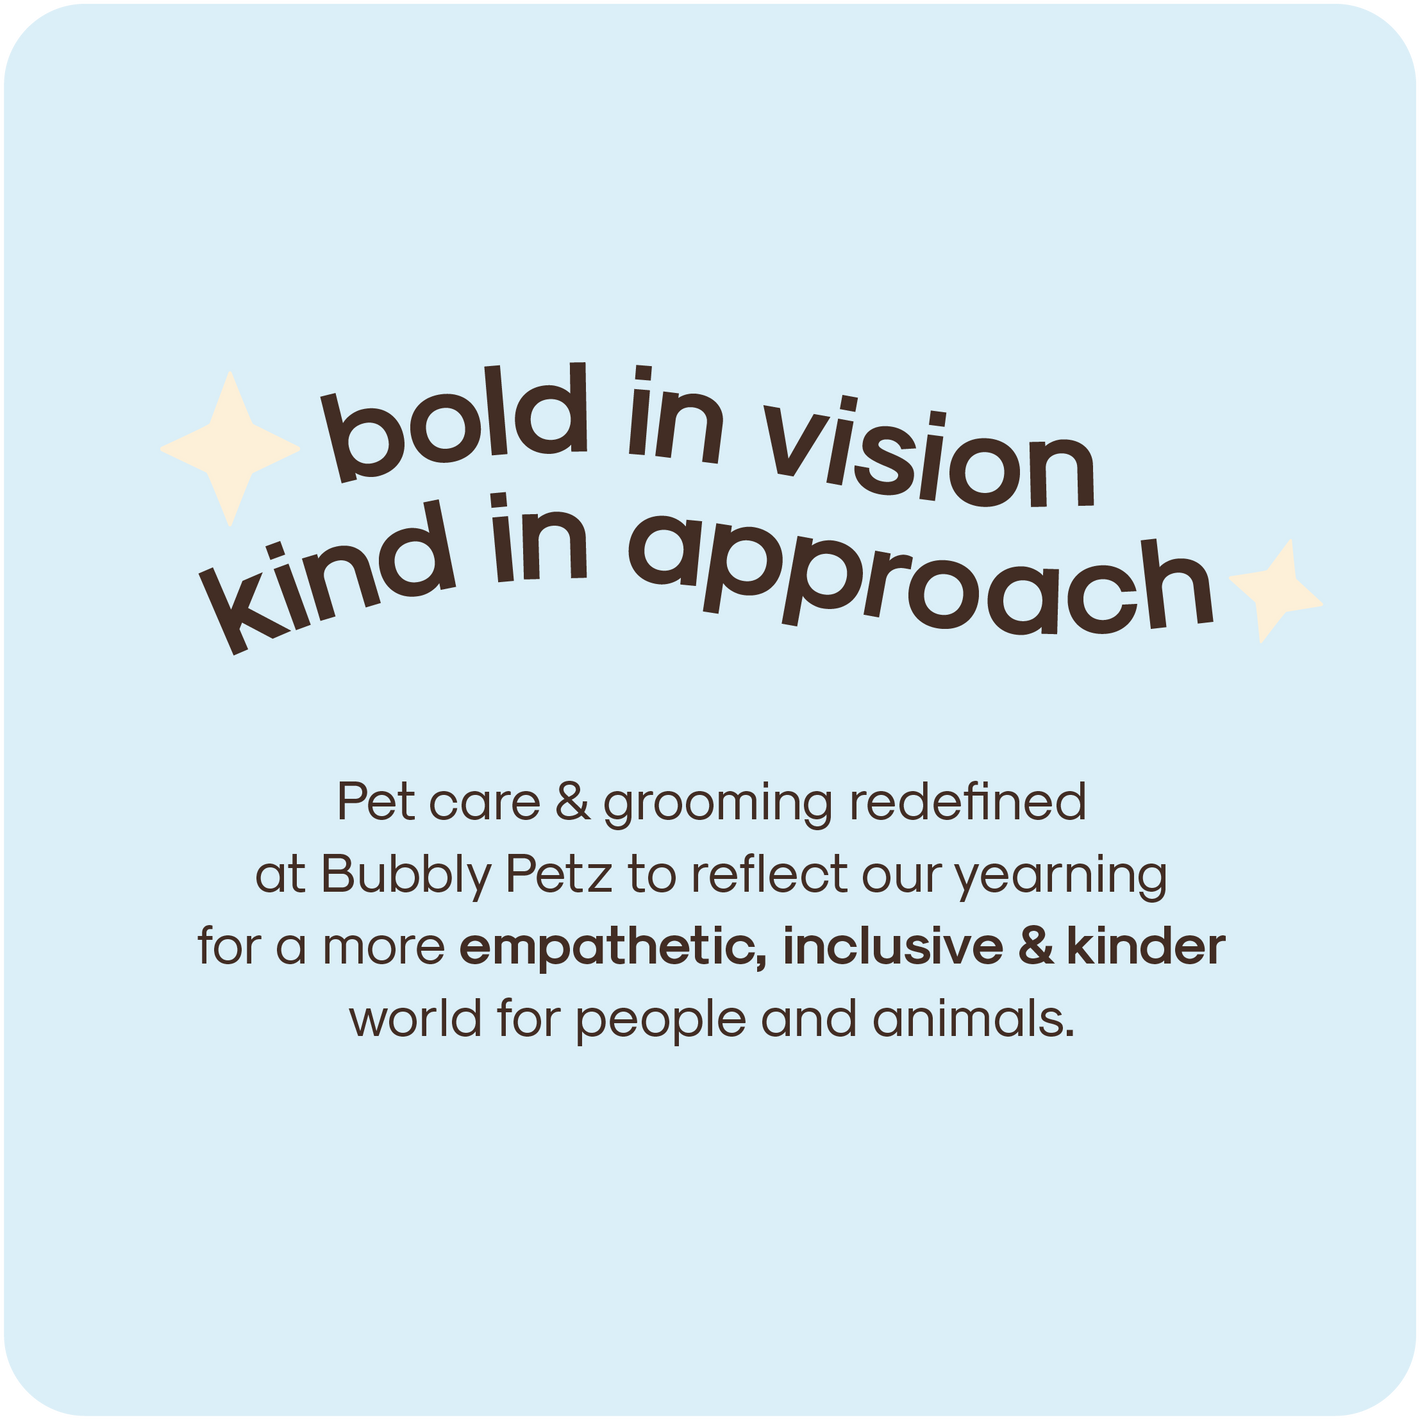 bold in vision, kind in approach